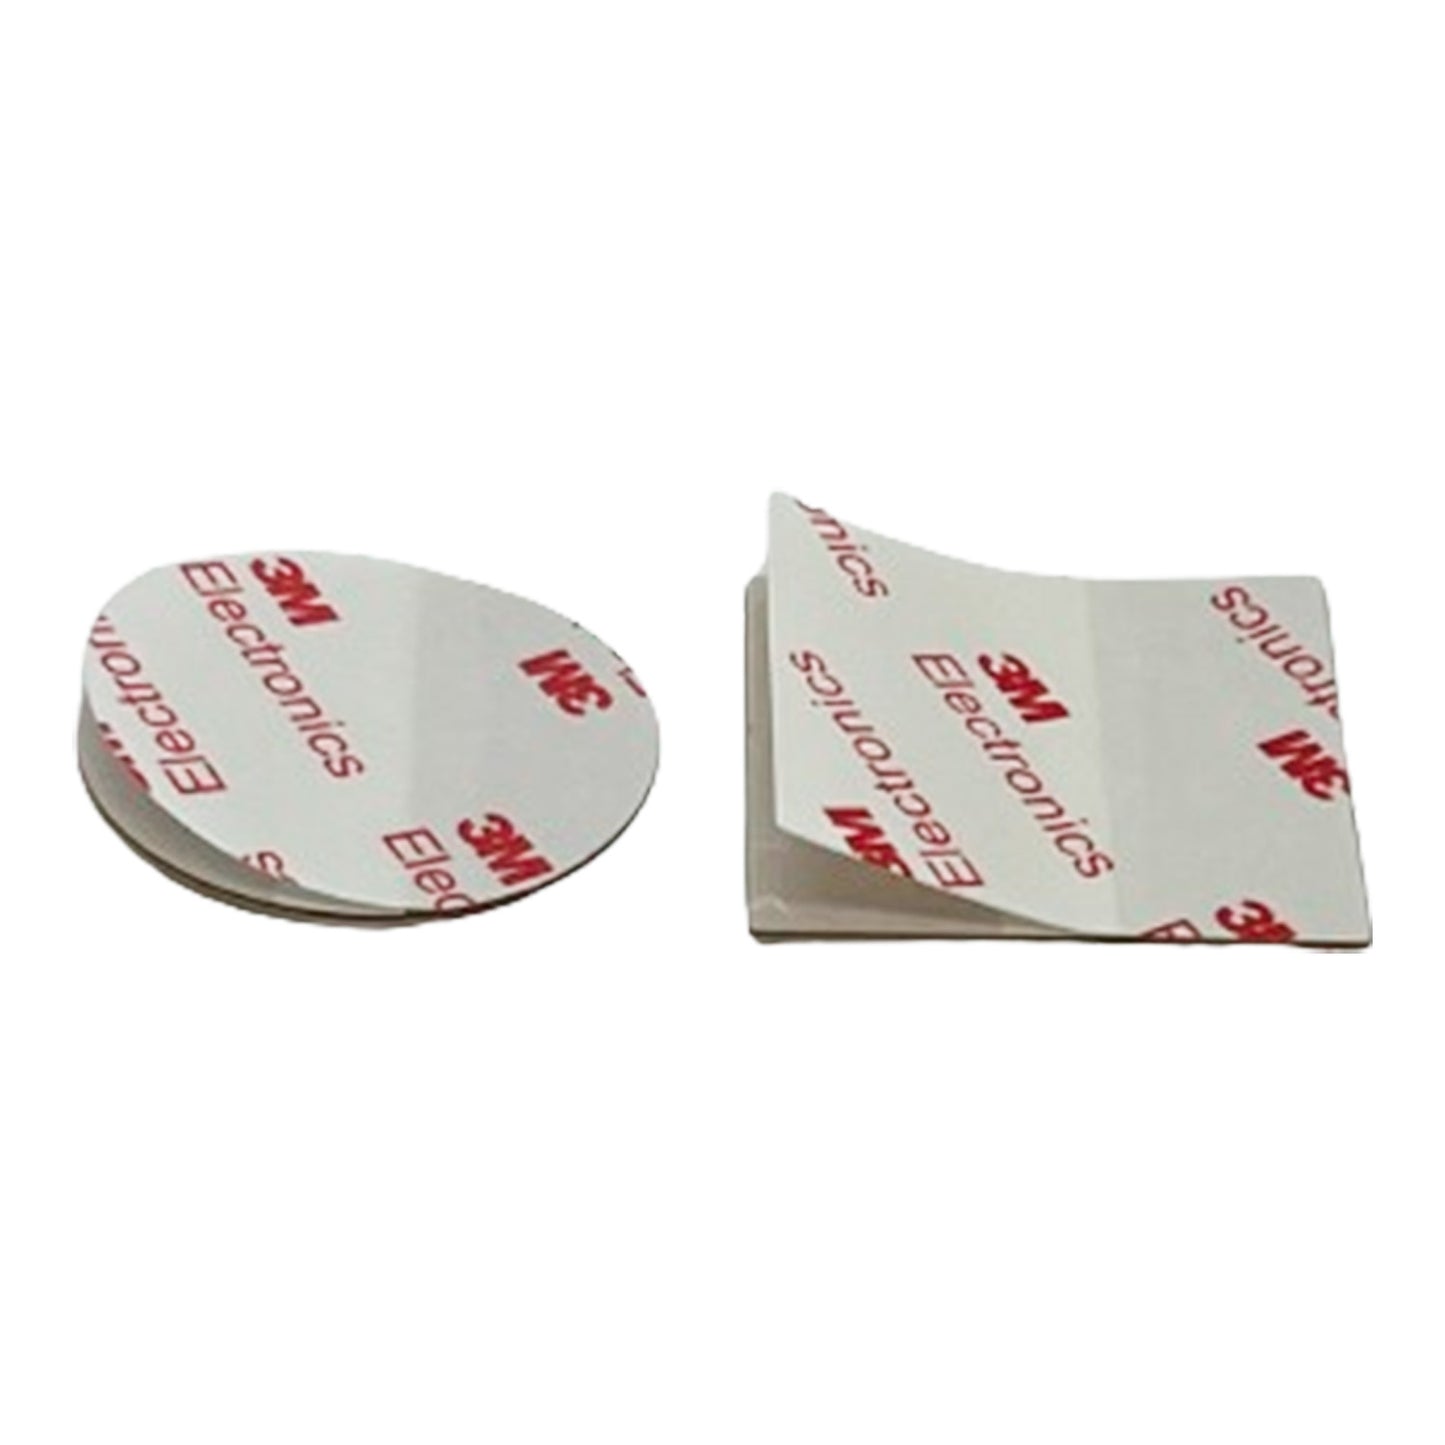 Adhesive Wafers - Rubber Stamp Materials